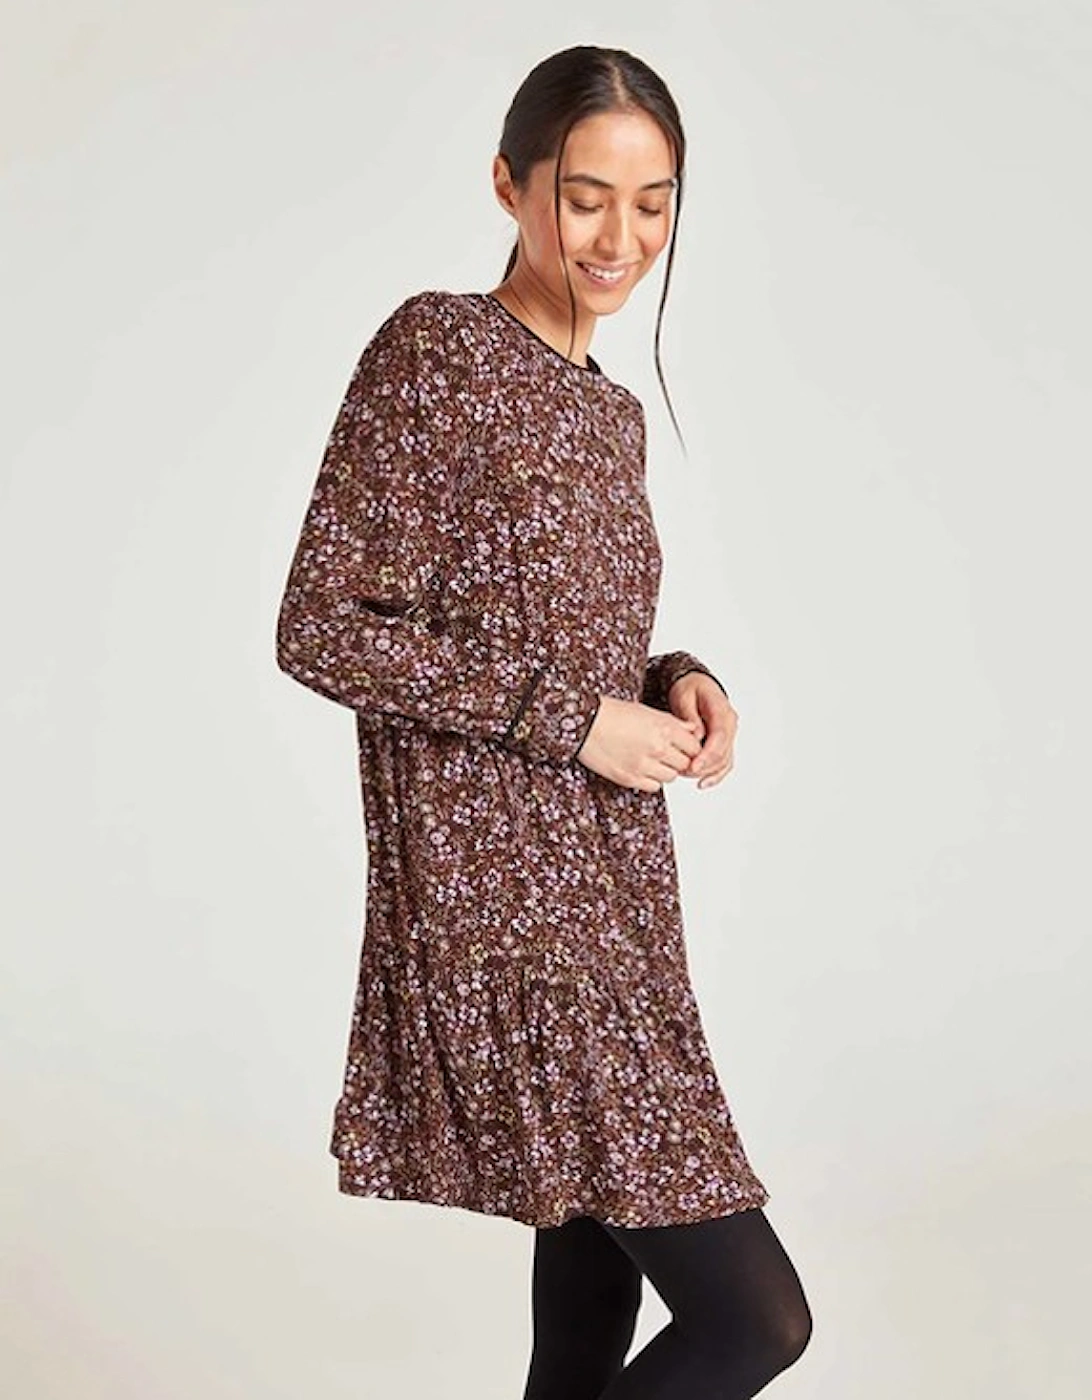 Thought Women's Lilith Lenzing EcoVera Dress Chocolate Brown